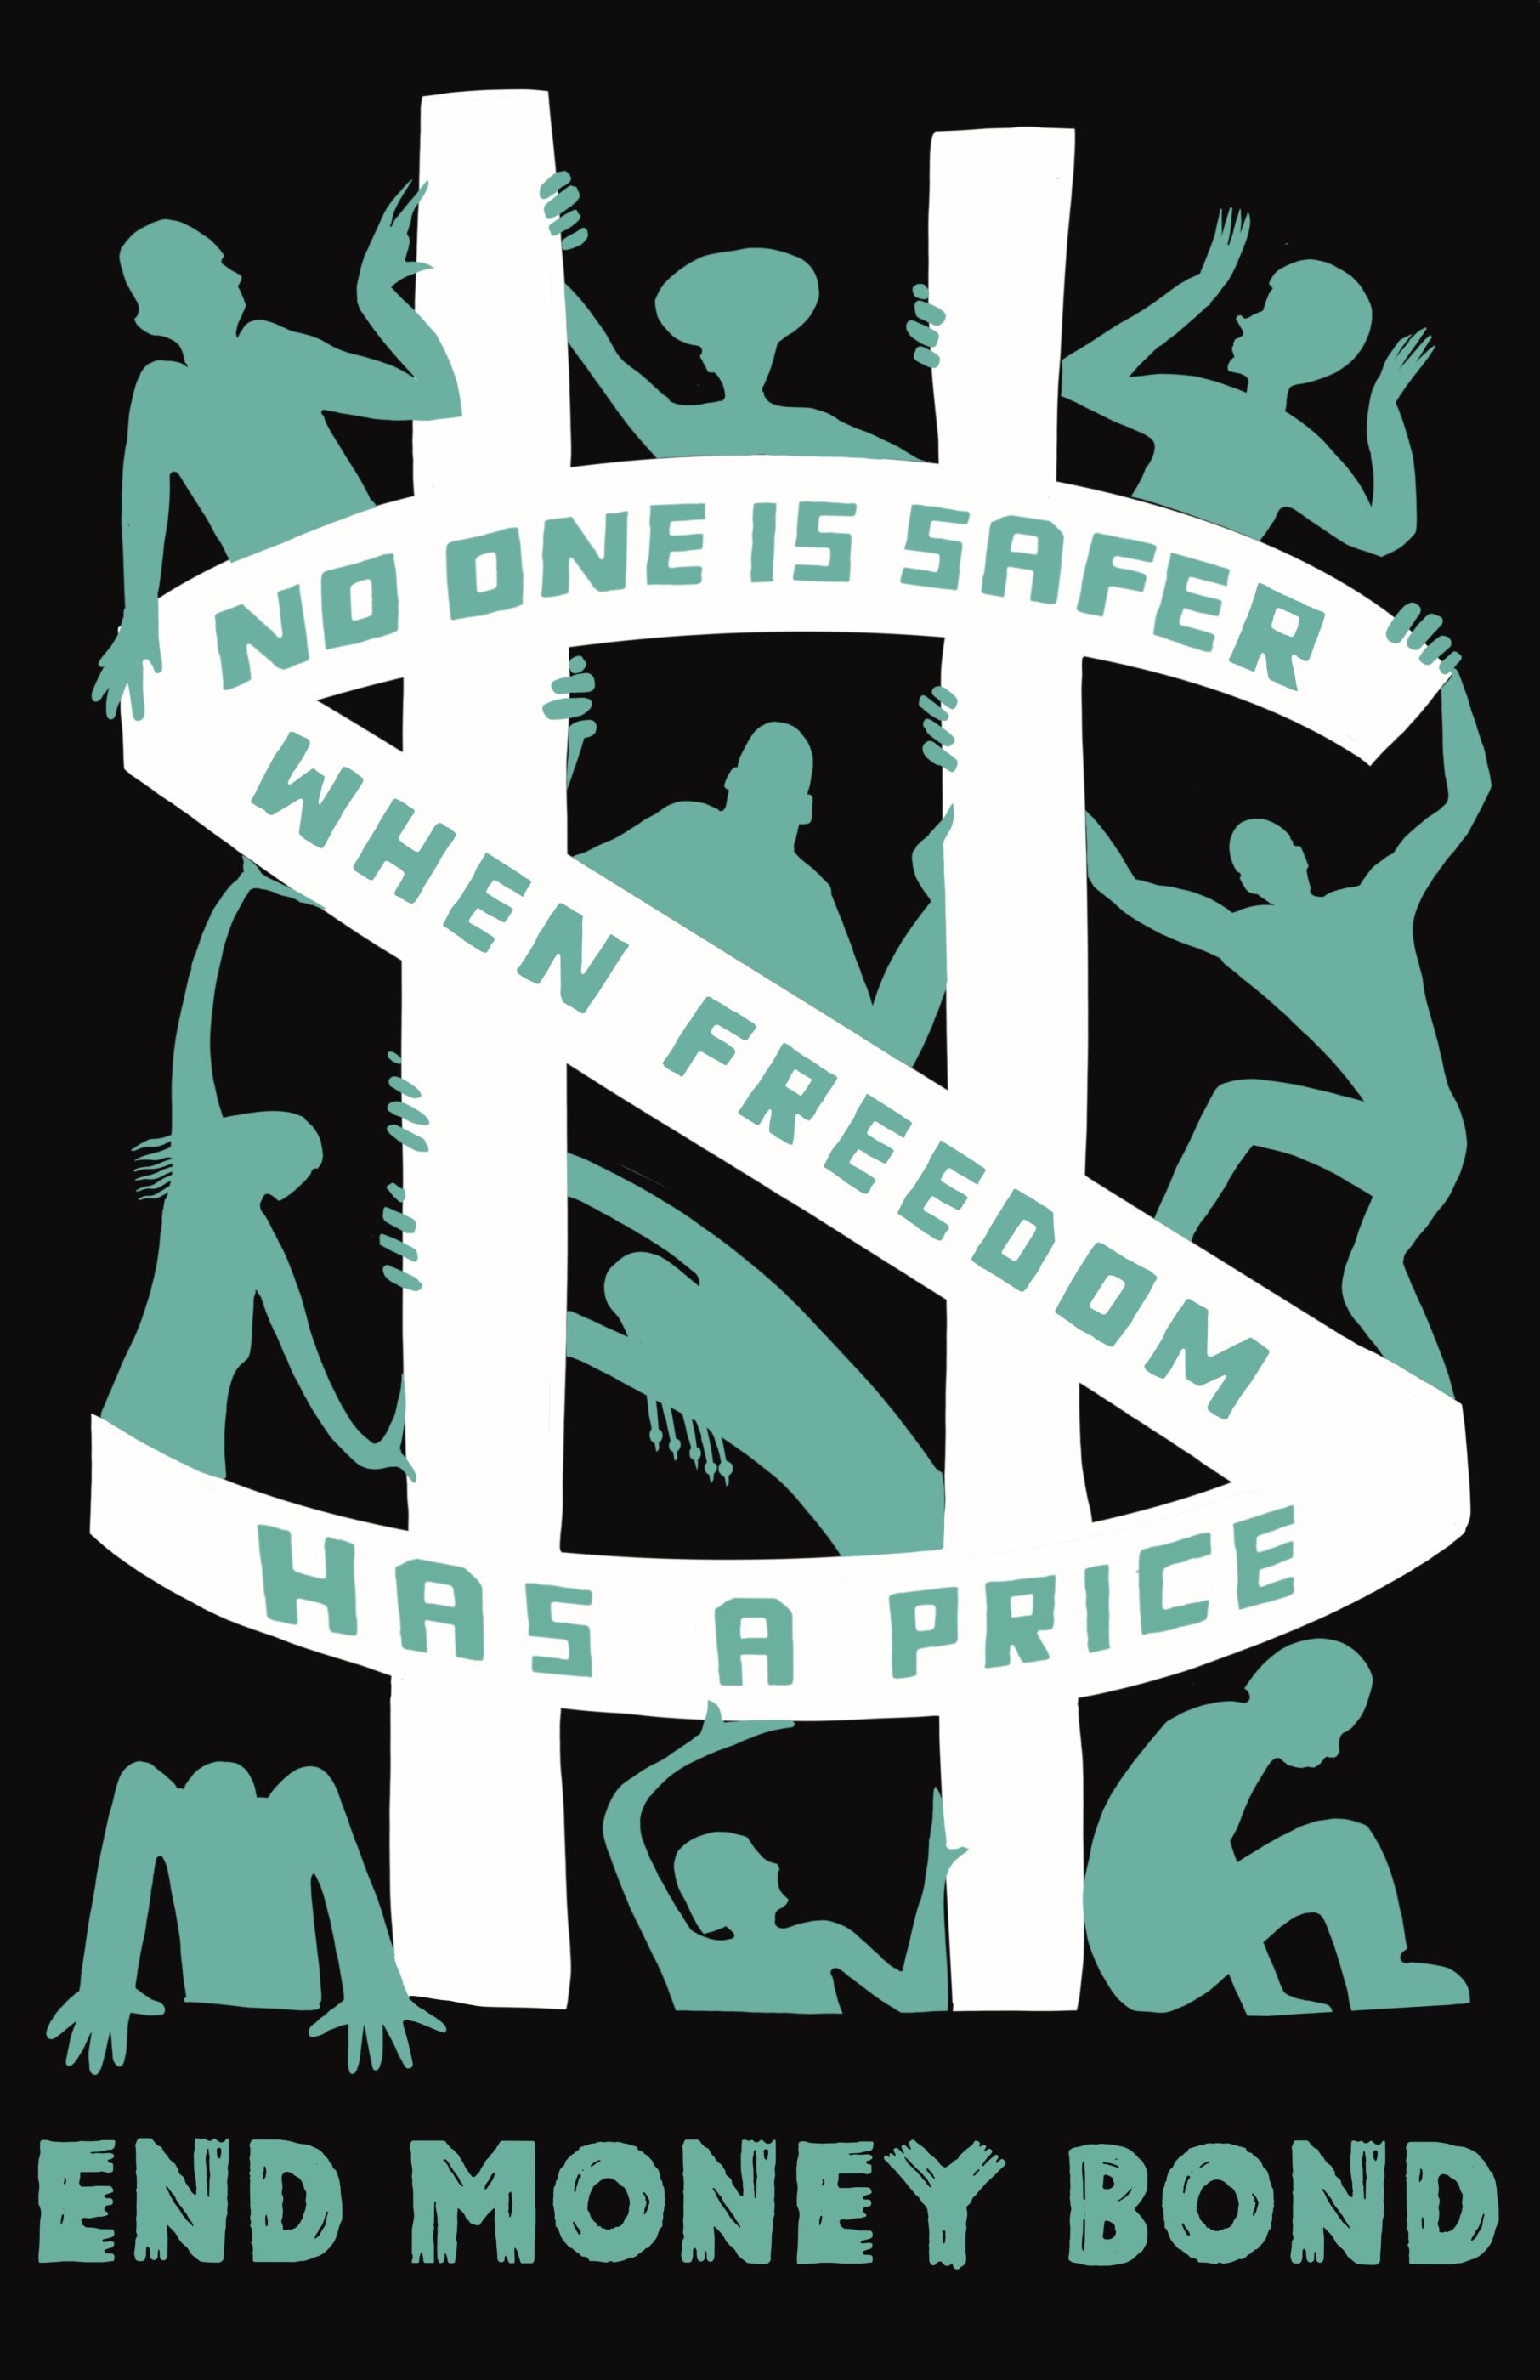 Artwork by Roger Peet. Image is an illustration of a white dollar sign symbolizing prison bars with teal silhouettes of people pushing and pulling at the bars on a black background. There are words in the money sign that read “No one is safer when freedom has a price” and at the bottom of the image that reads “end money bond.”